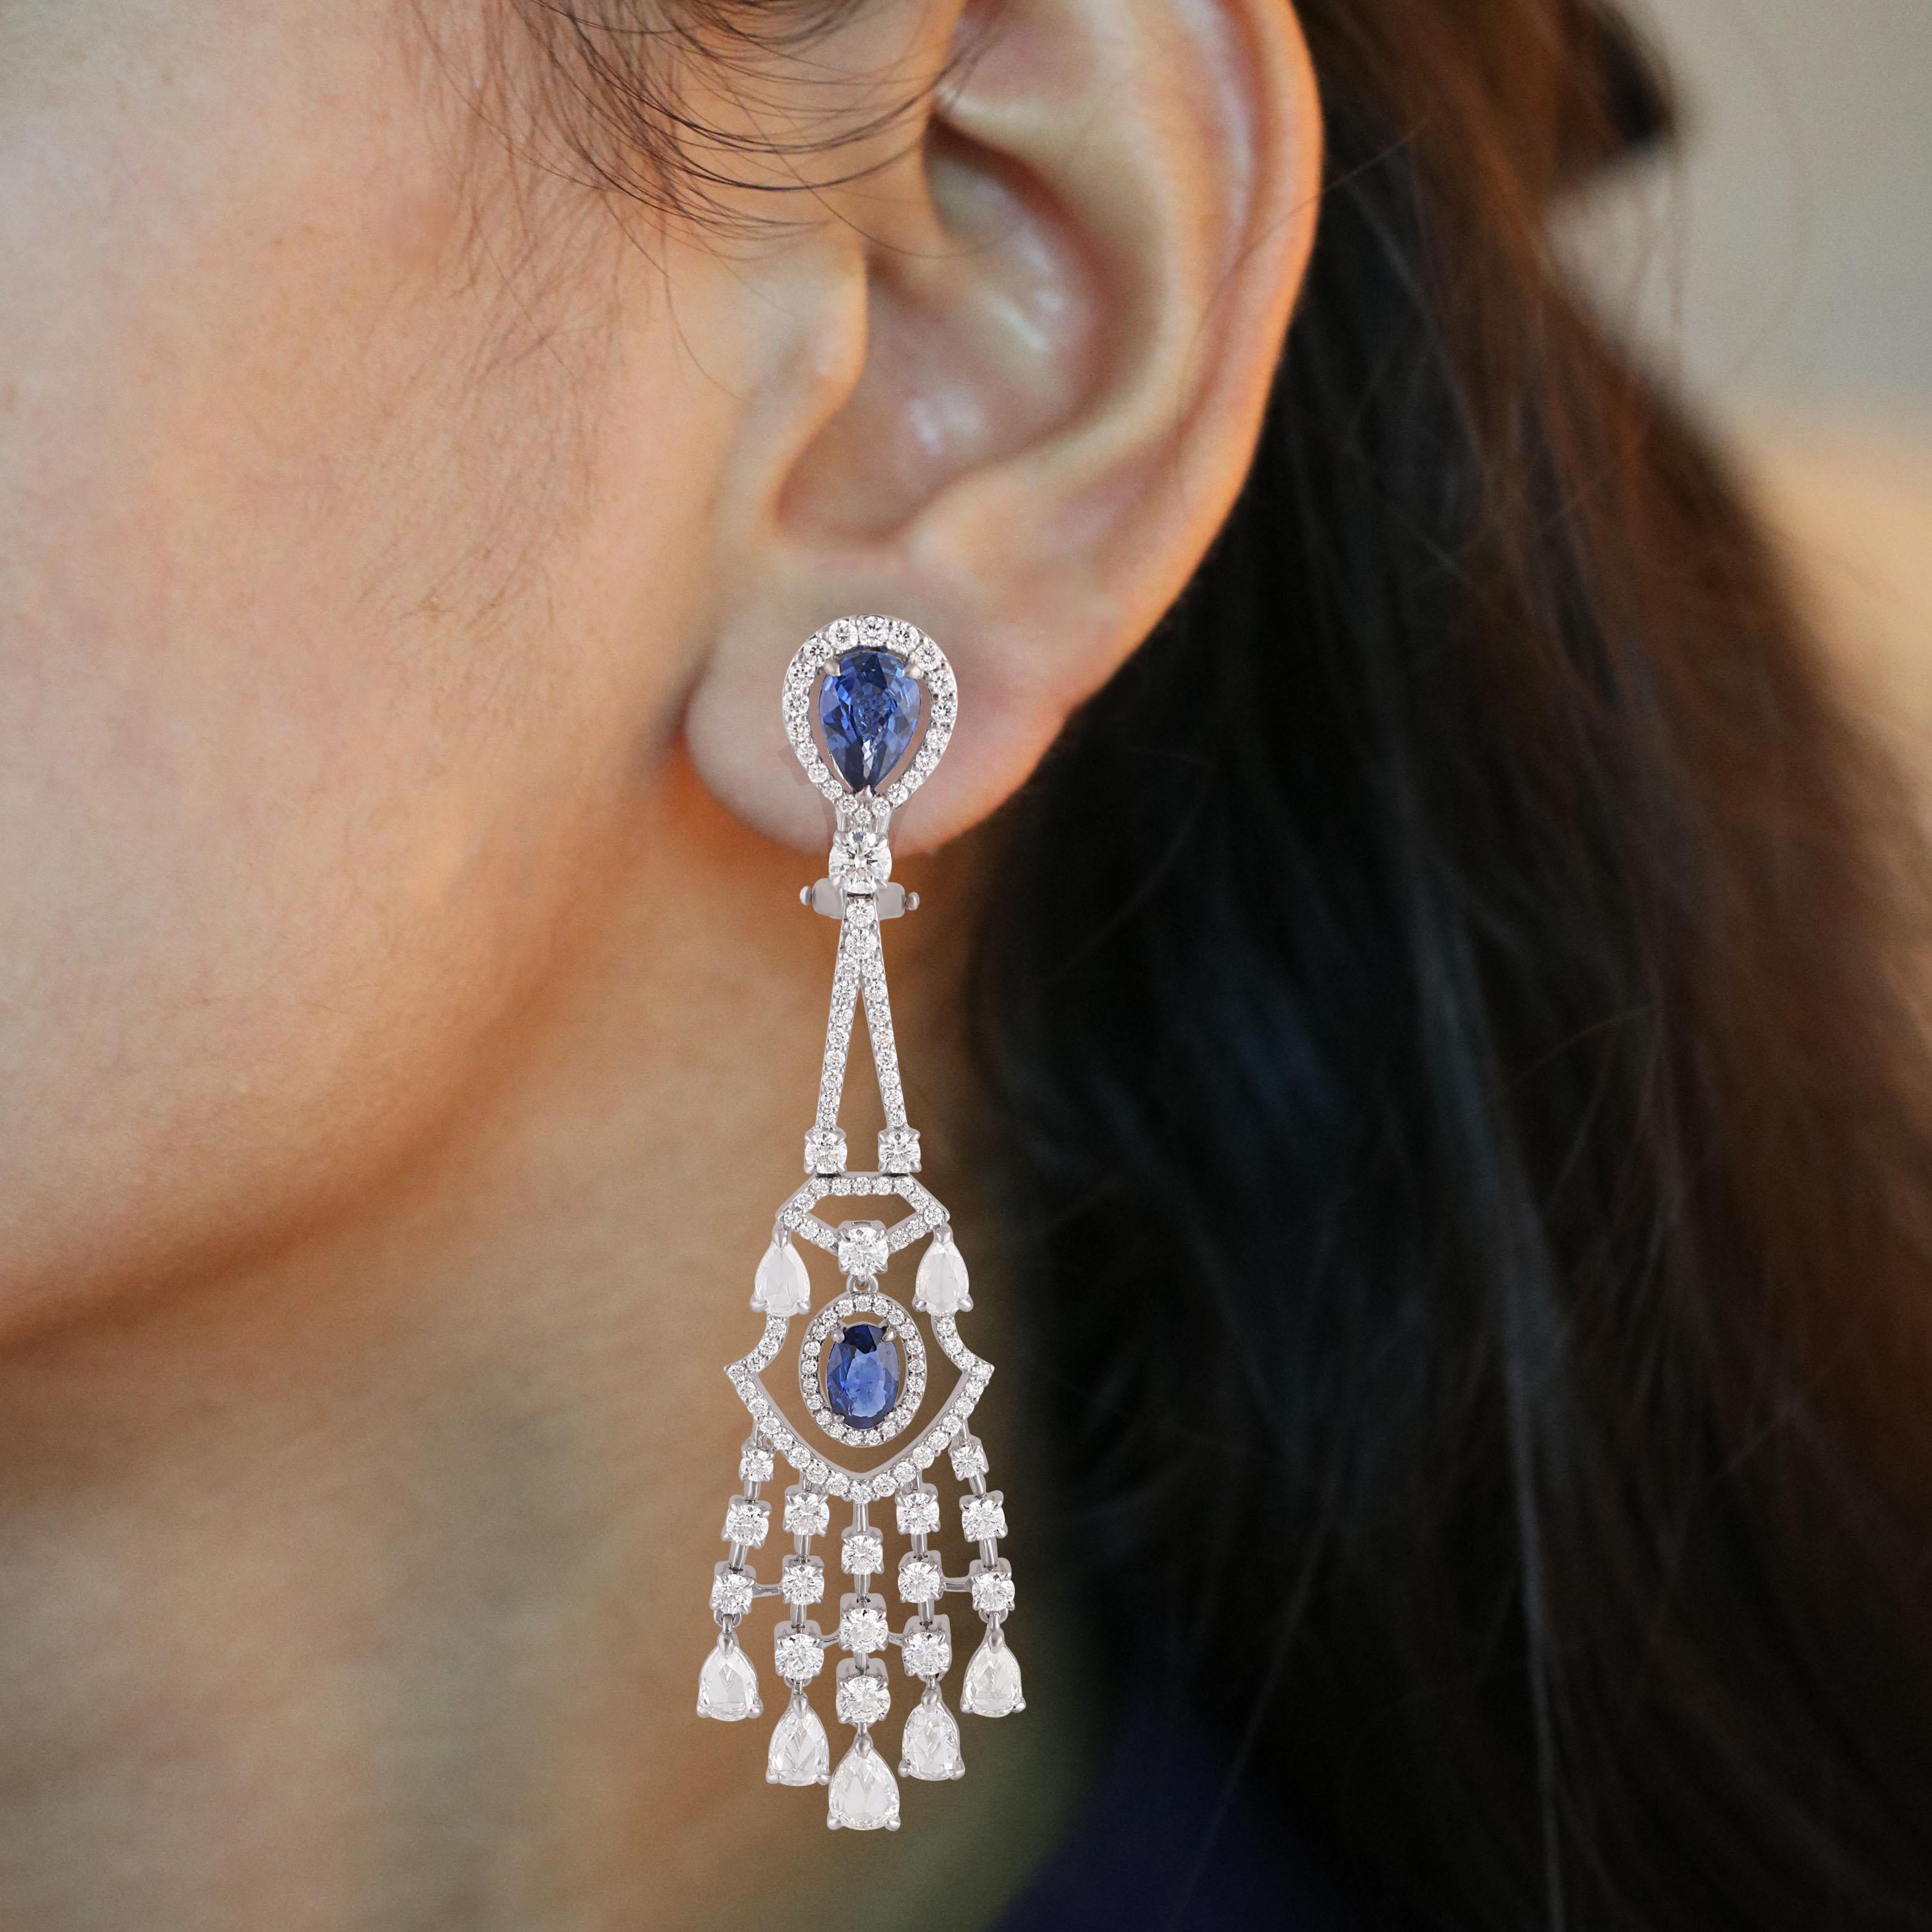 Diamond Weight: 5.33 cts
Blue Sapphire Weight: 3.42 cts
IGI Certified

Video of the product can be shared upon request.

The intricate workmanship of these earrings resembles an exquisite piece of hand crocheted lace. Rows of prong set diamonds form